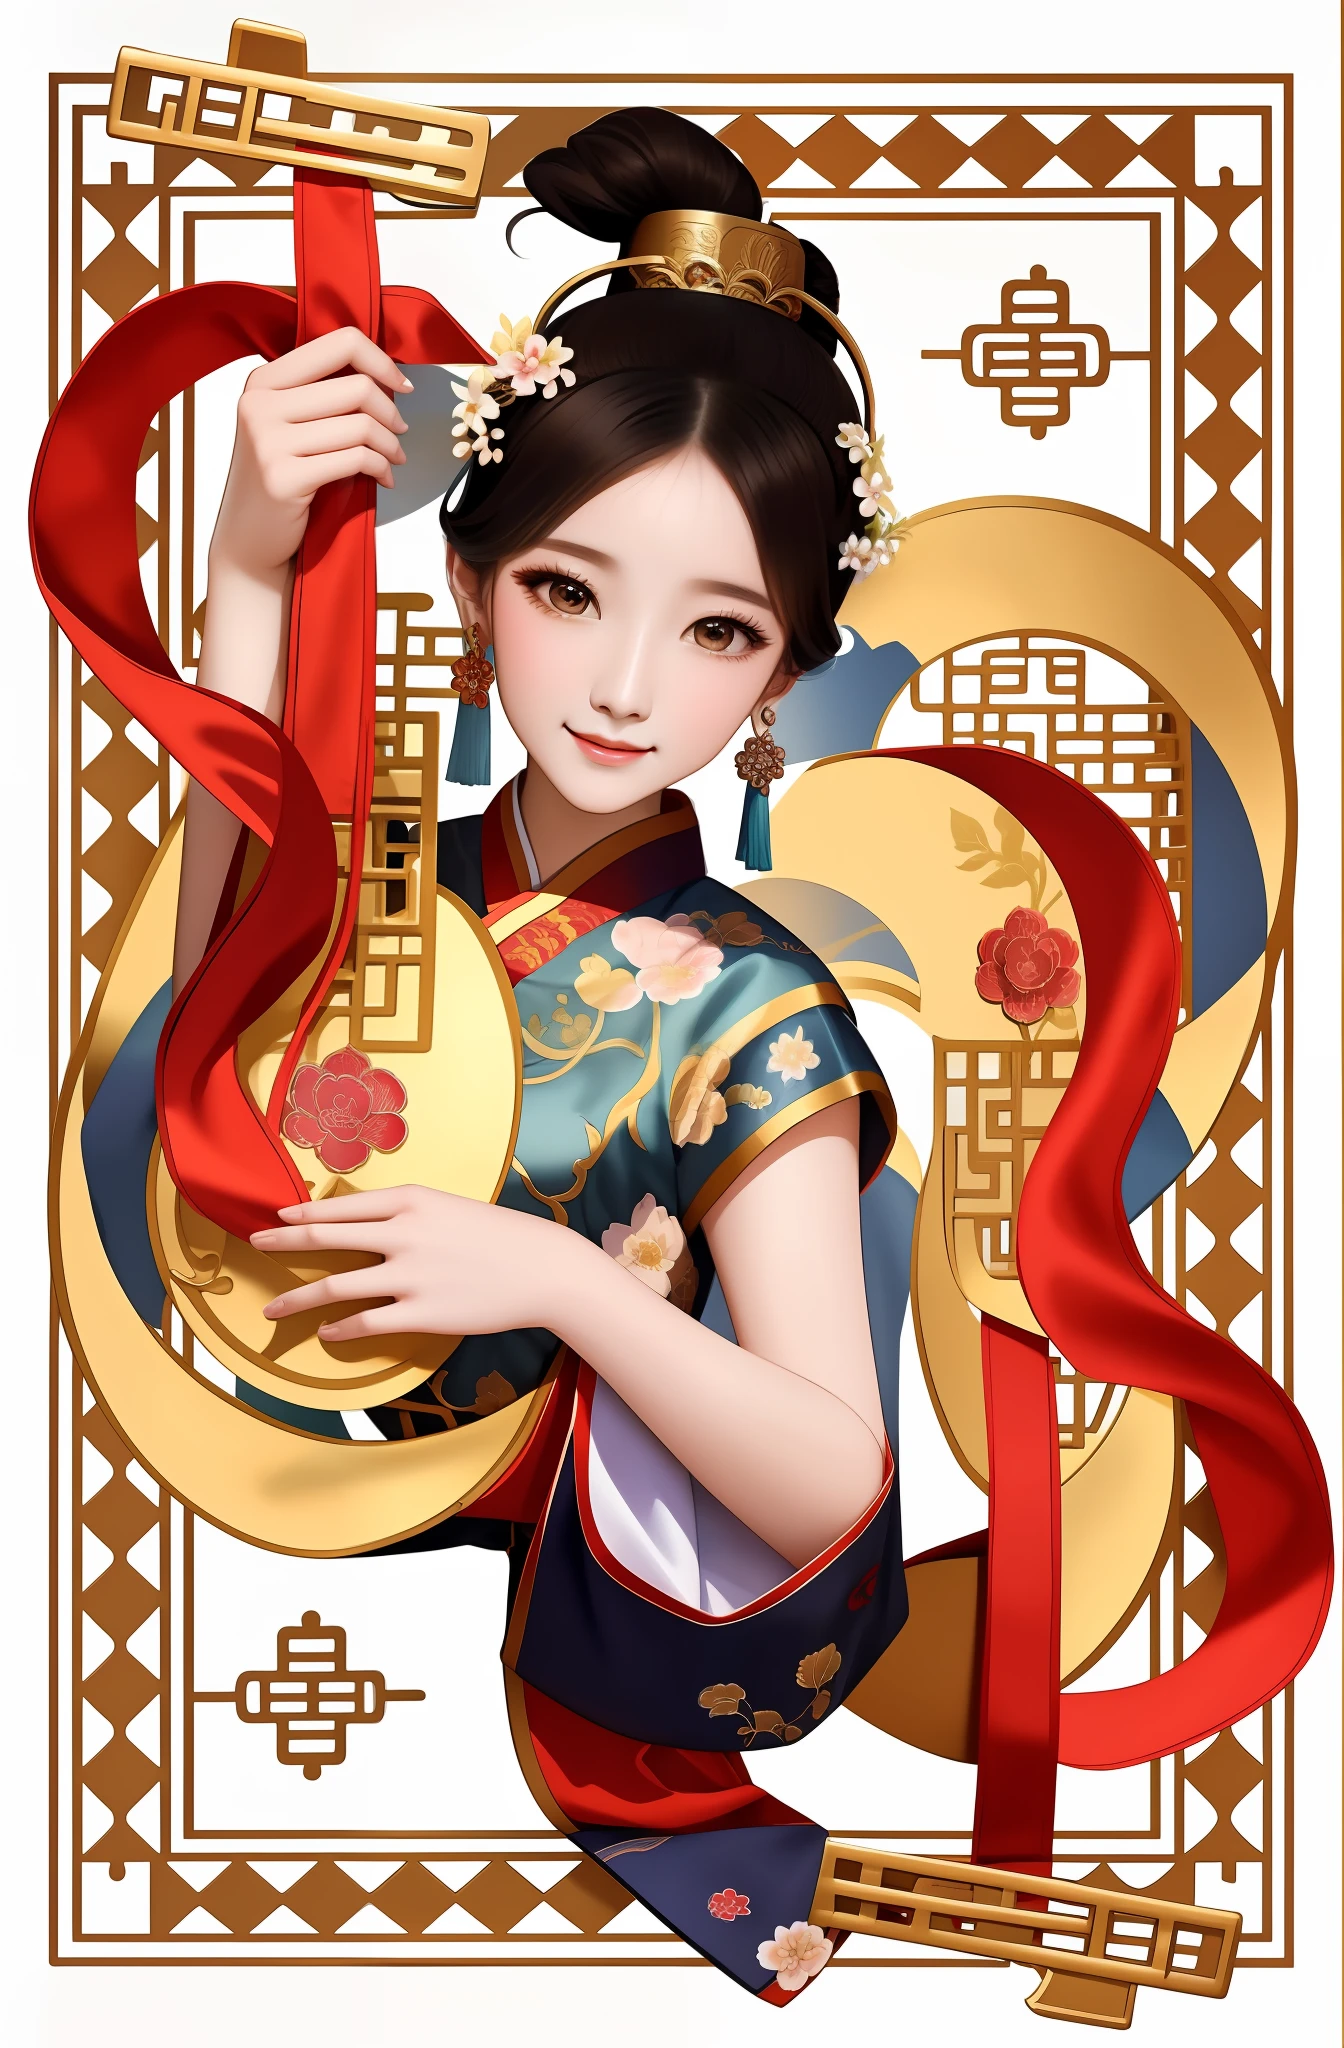 Close-up of a woman holding an instrument, Palace ， A girl in Hanfu, A beautiful artwork illustration, ancient chinese beauti, inspired by Wu Bin, Princesa chinesa antiga, Chinese girl, Inspired by Song Maojin, ancient china art style, inspired by Gong Xian, Guviz-style artwork, inspired by Park Hua